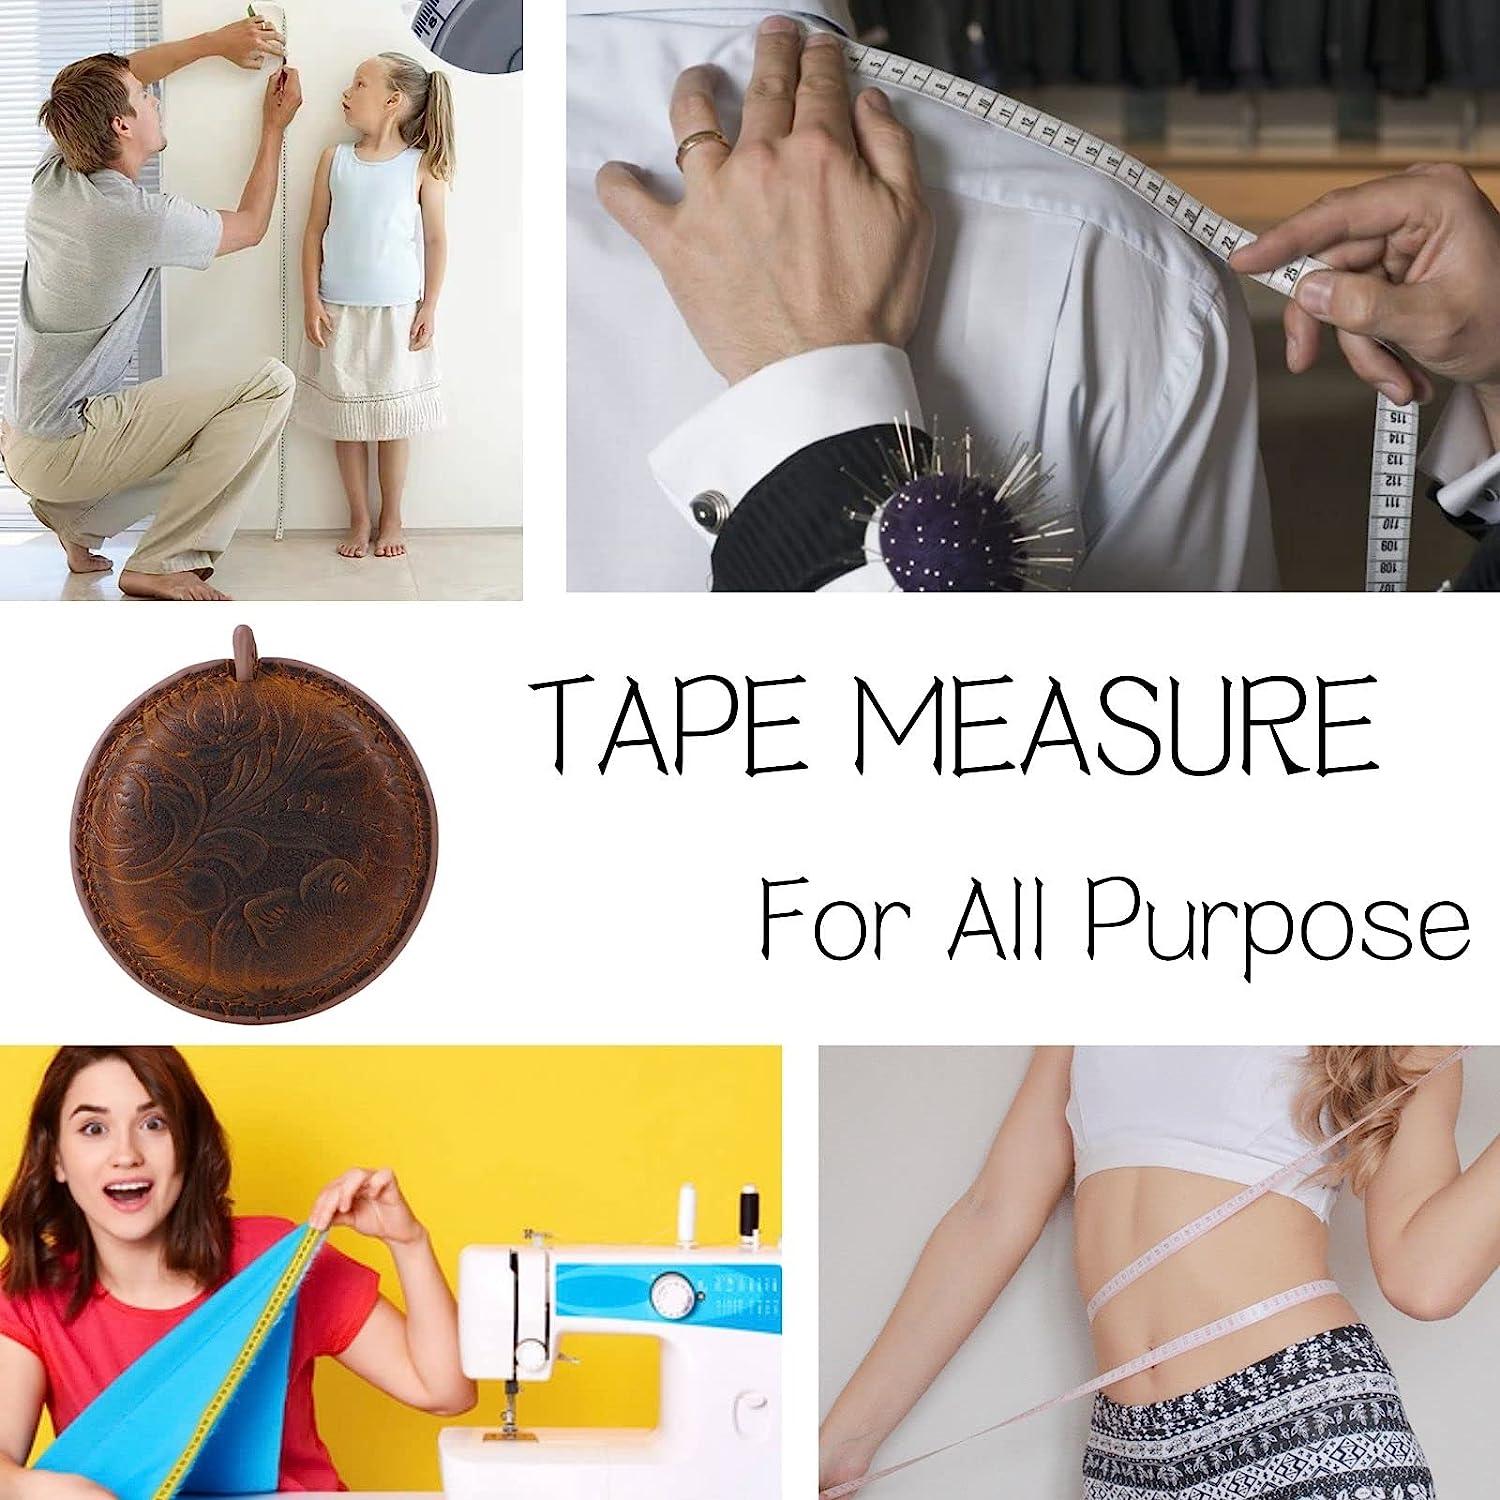 Measuring Tape - Body & Fabric Measure Tape for Sewing, Seamstress, Tailor,  Cloth, Waist, Crafting, Fitness, Dual Sided Multipurpose Metric Tape 60